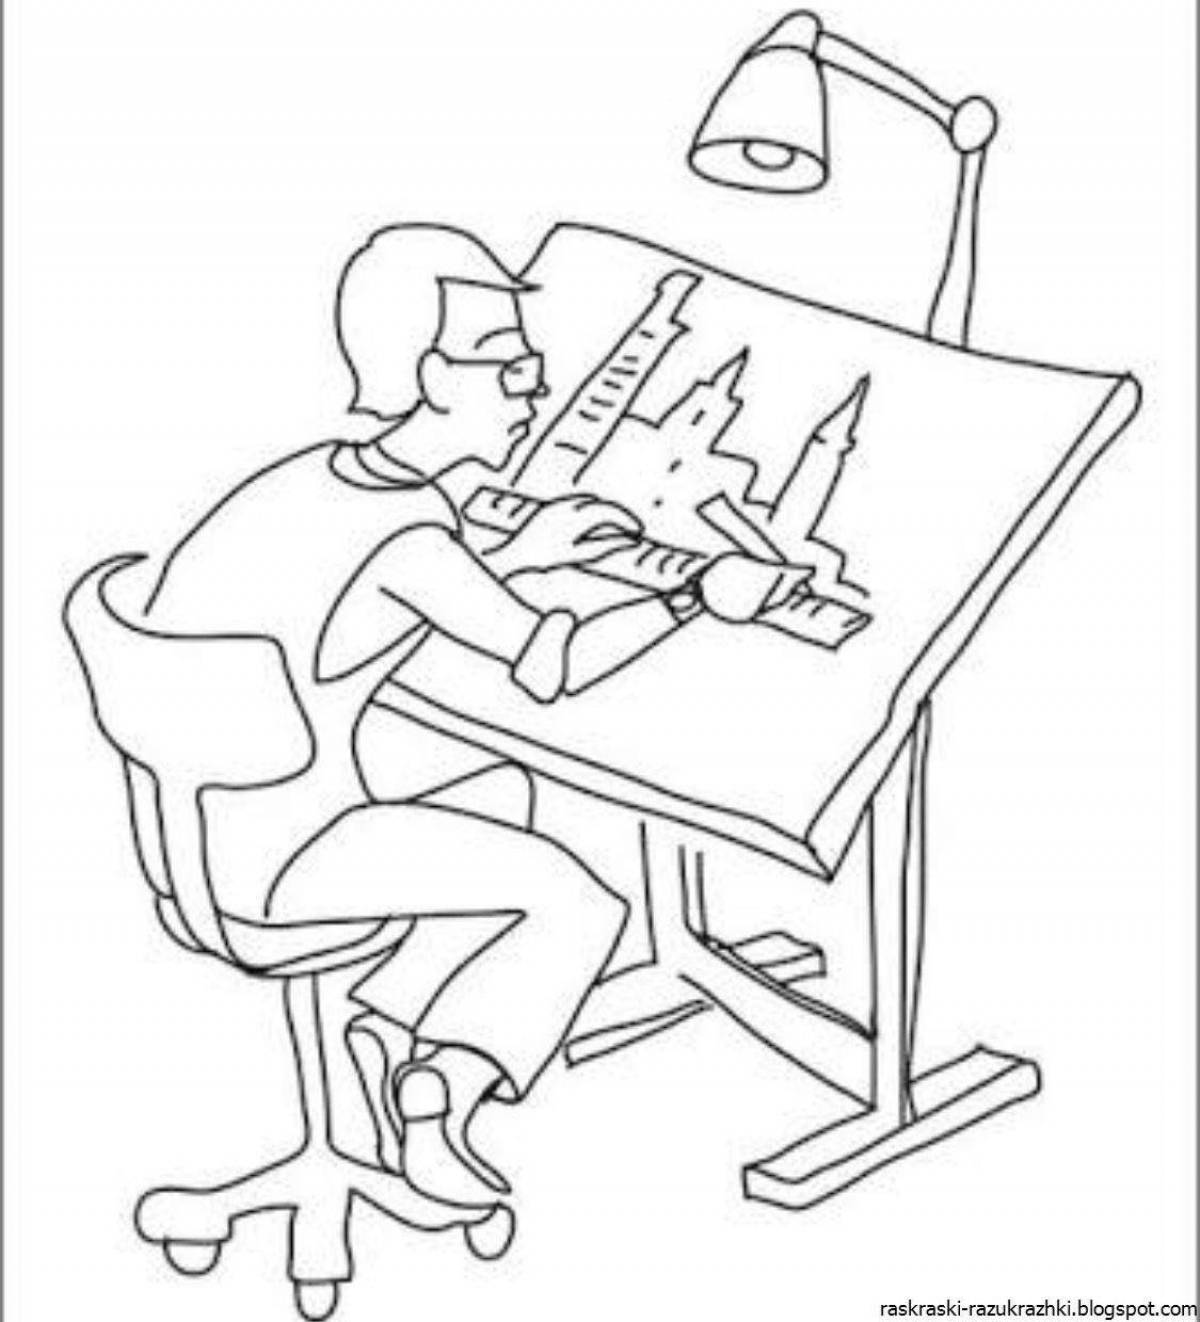 Colorful engineer coloring page